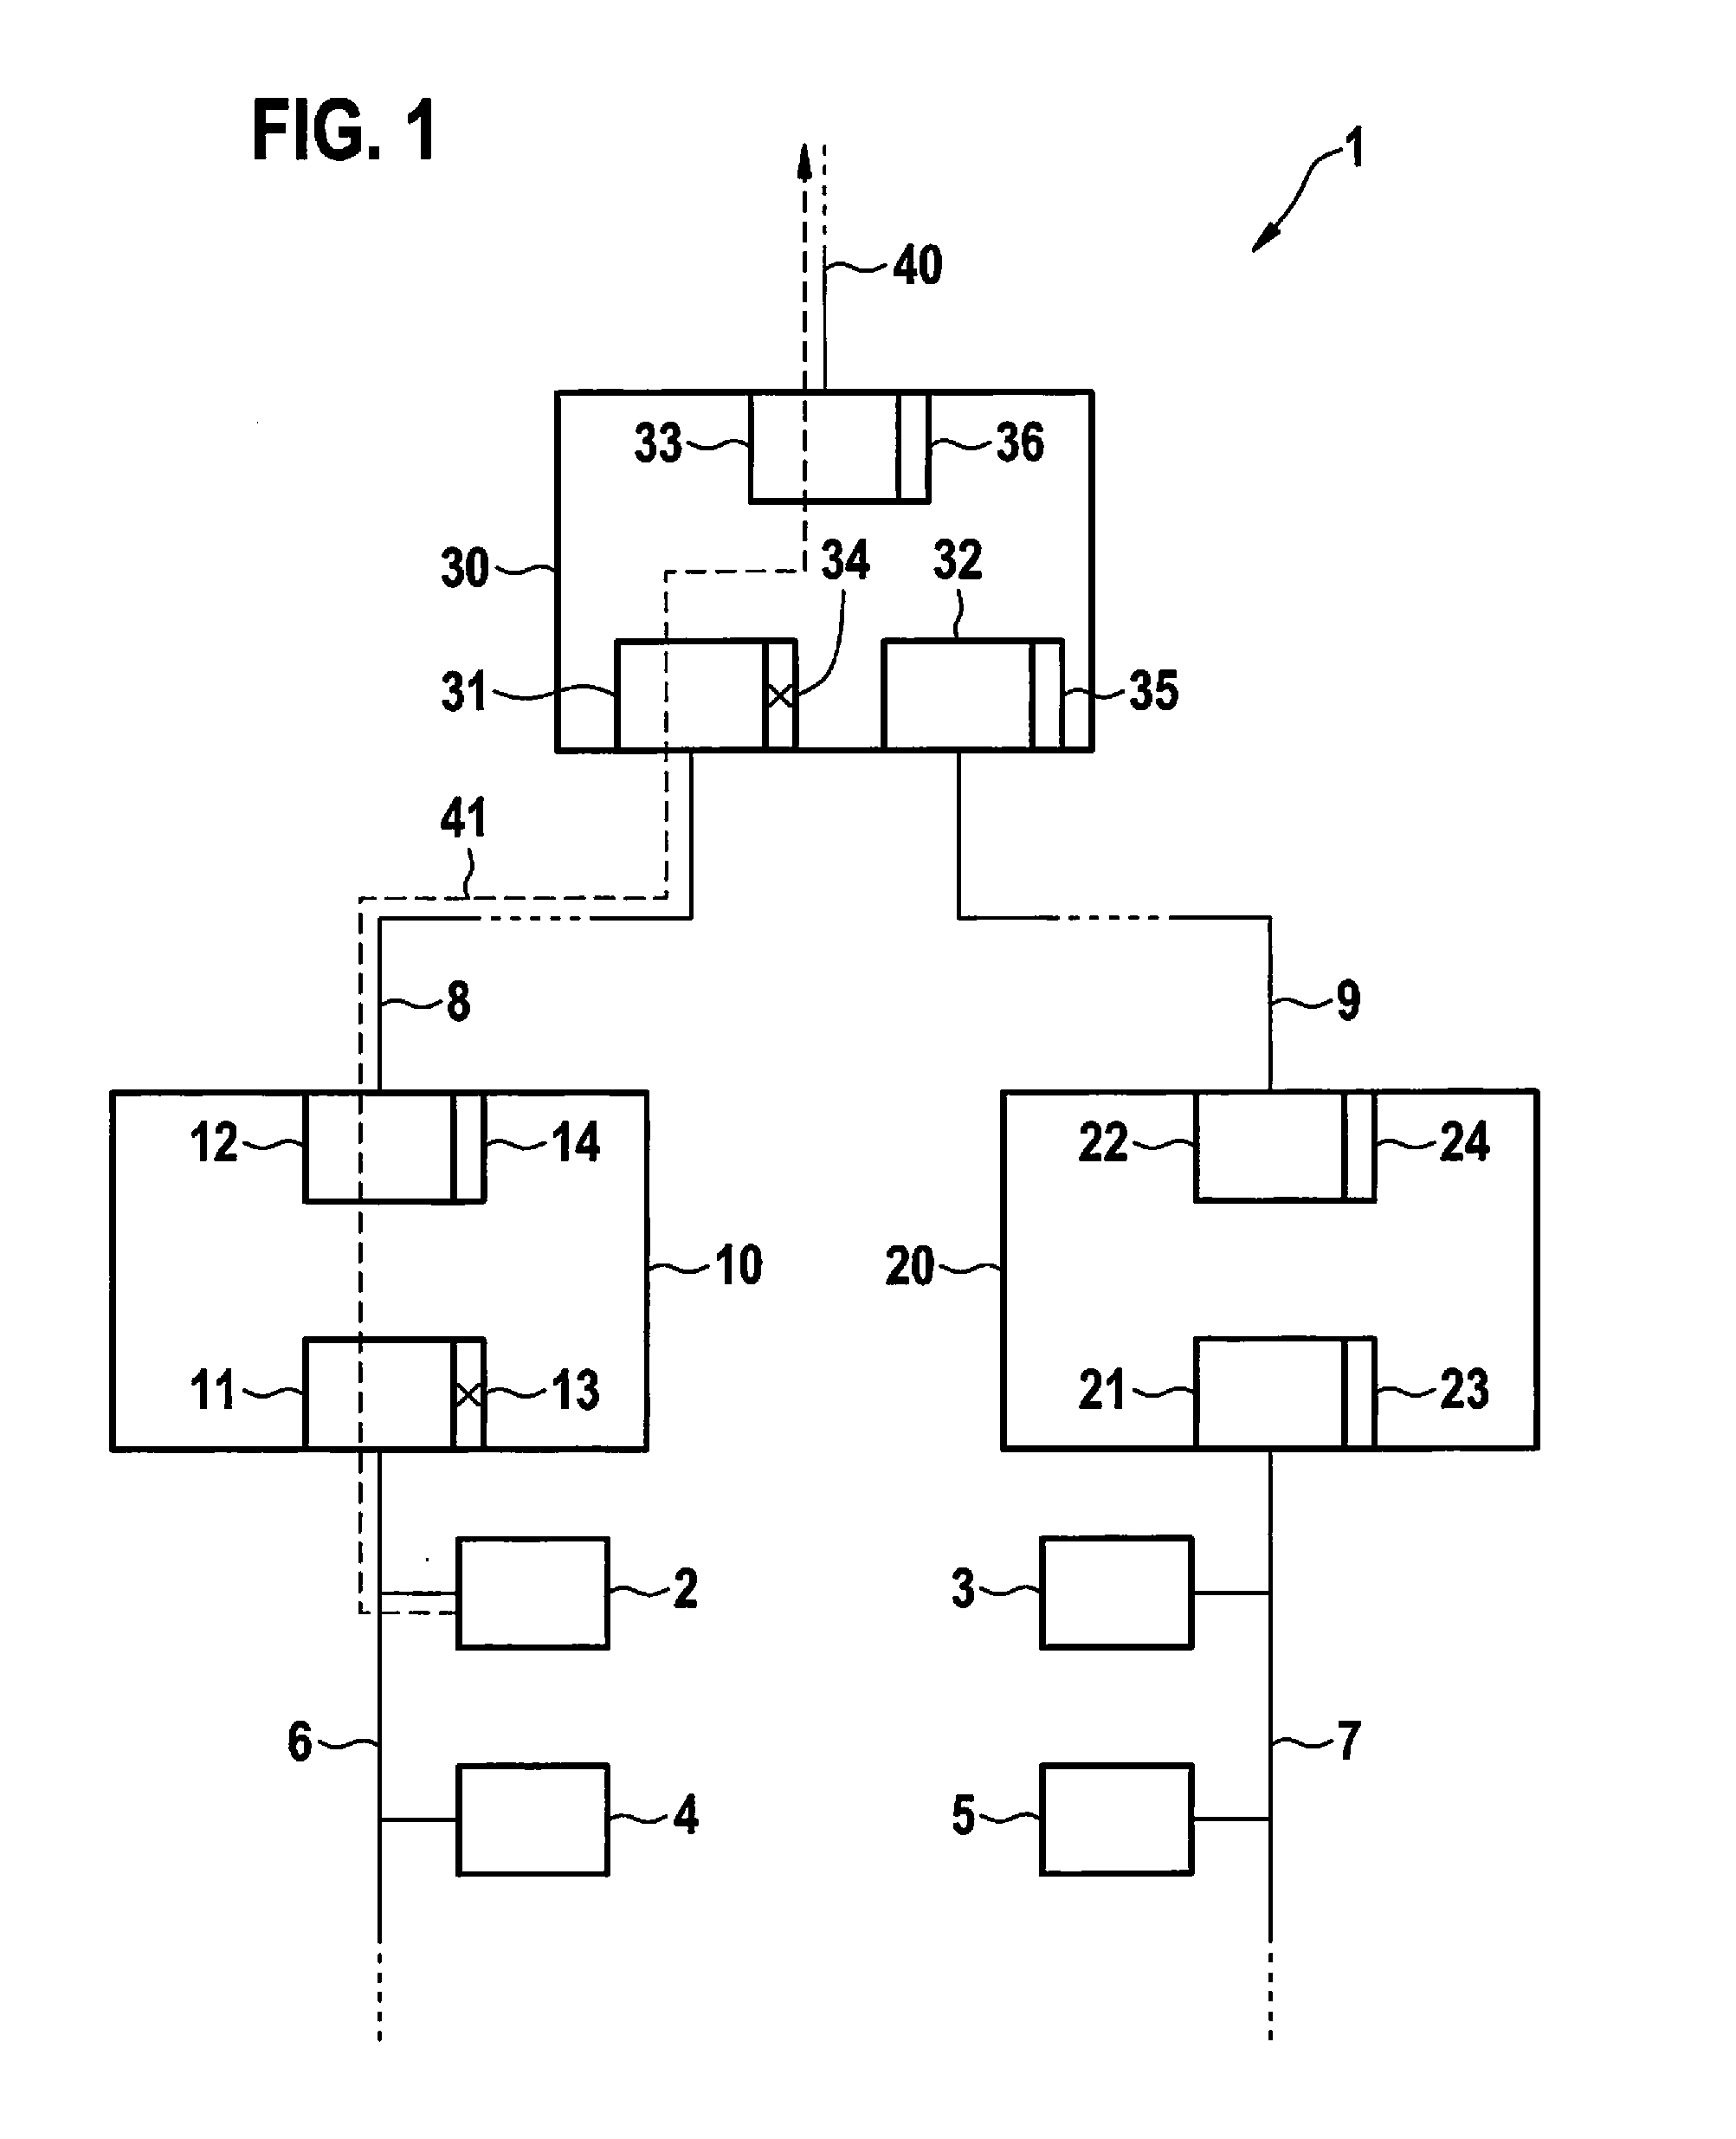 Method for operating a gateway